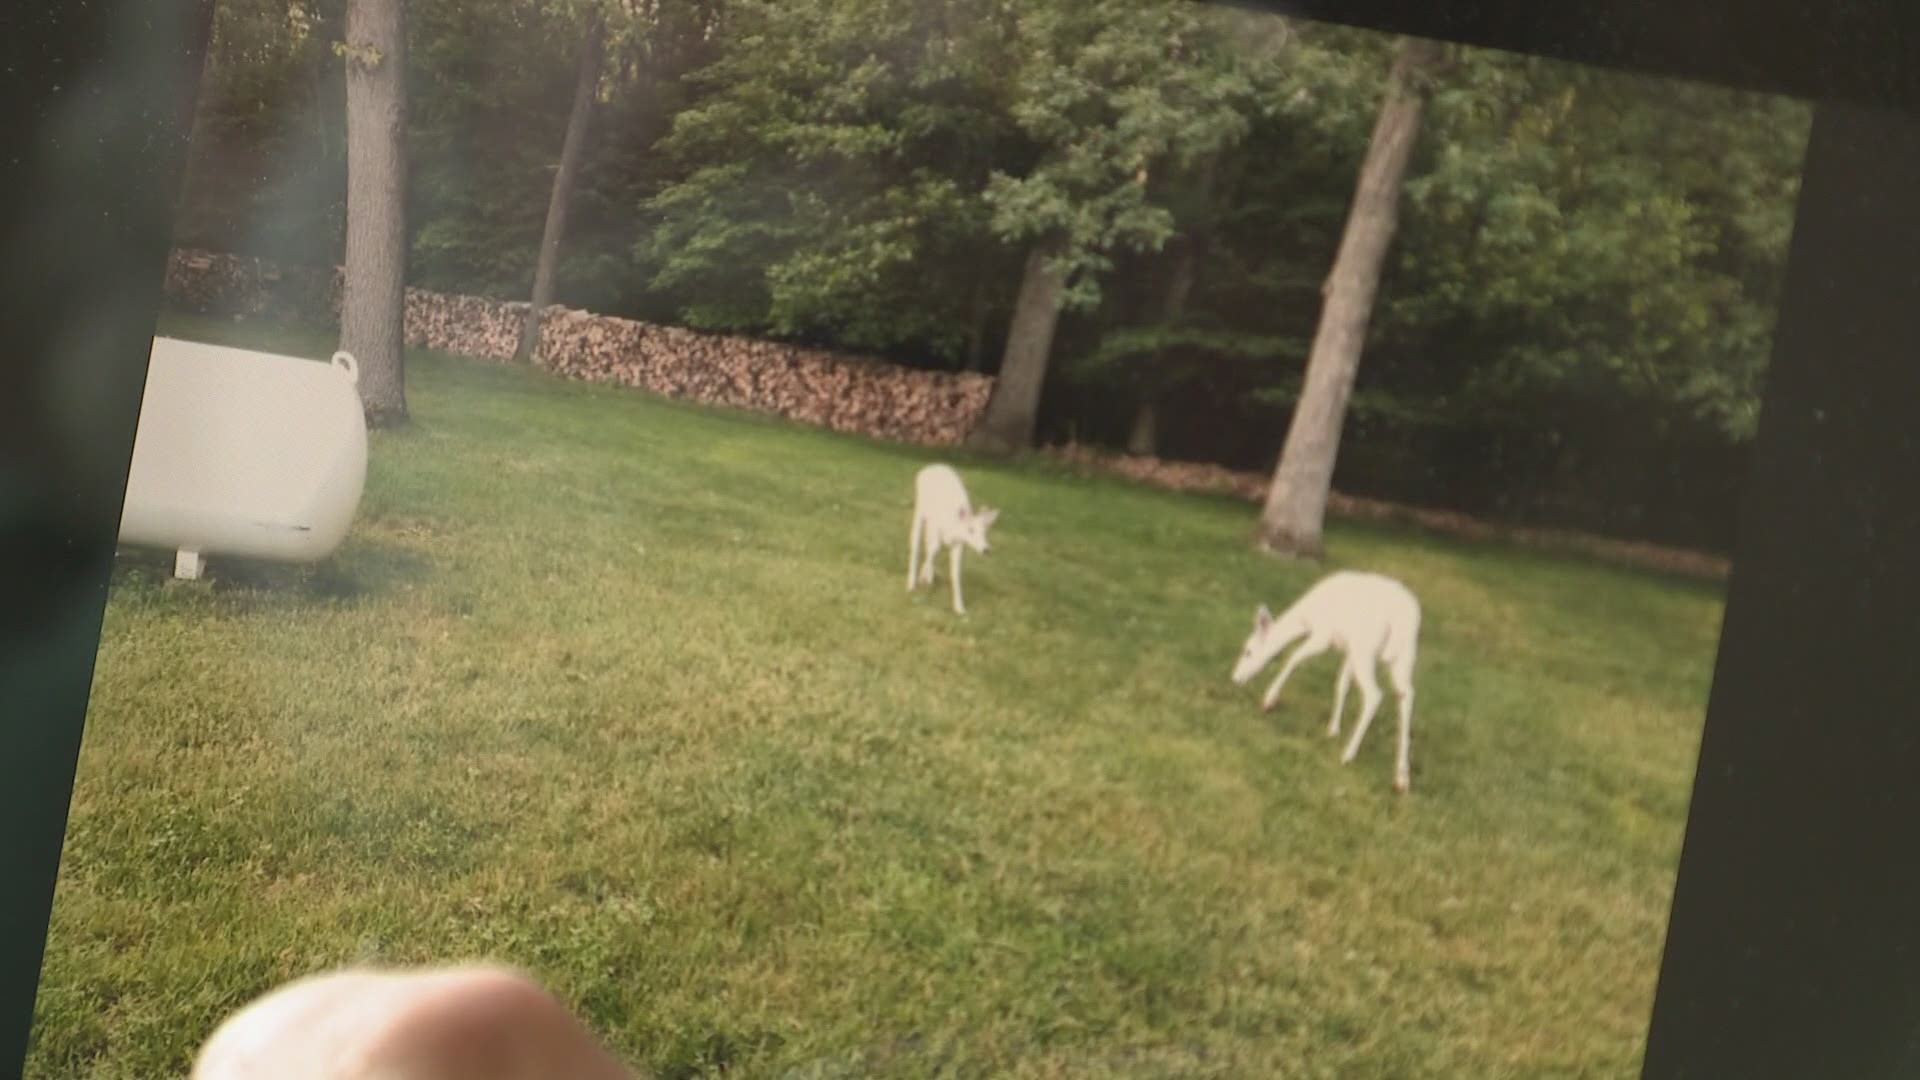 The DNR is offering an award for information regarding the death of an albino deer.